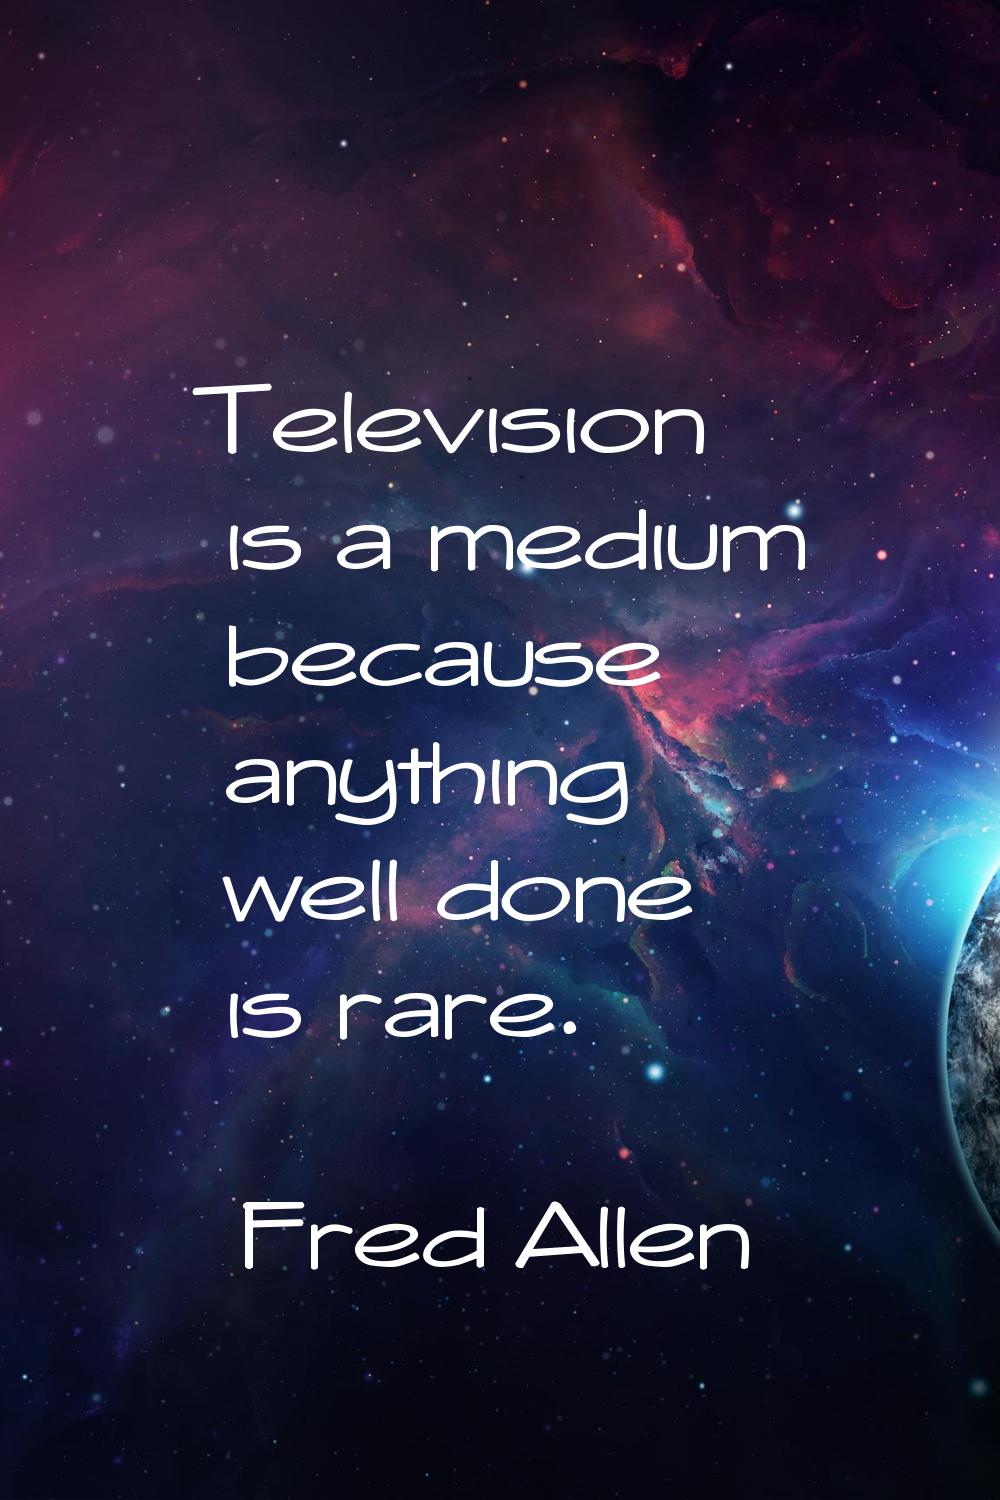 Television is a medium because anything well done is rare.